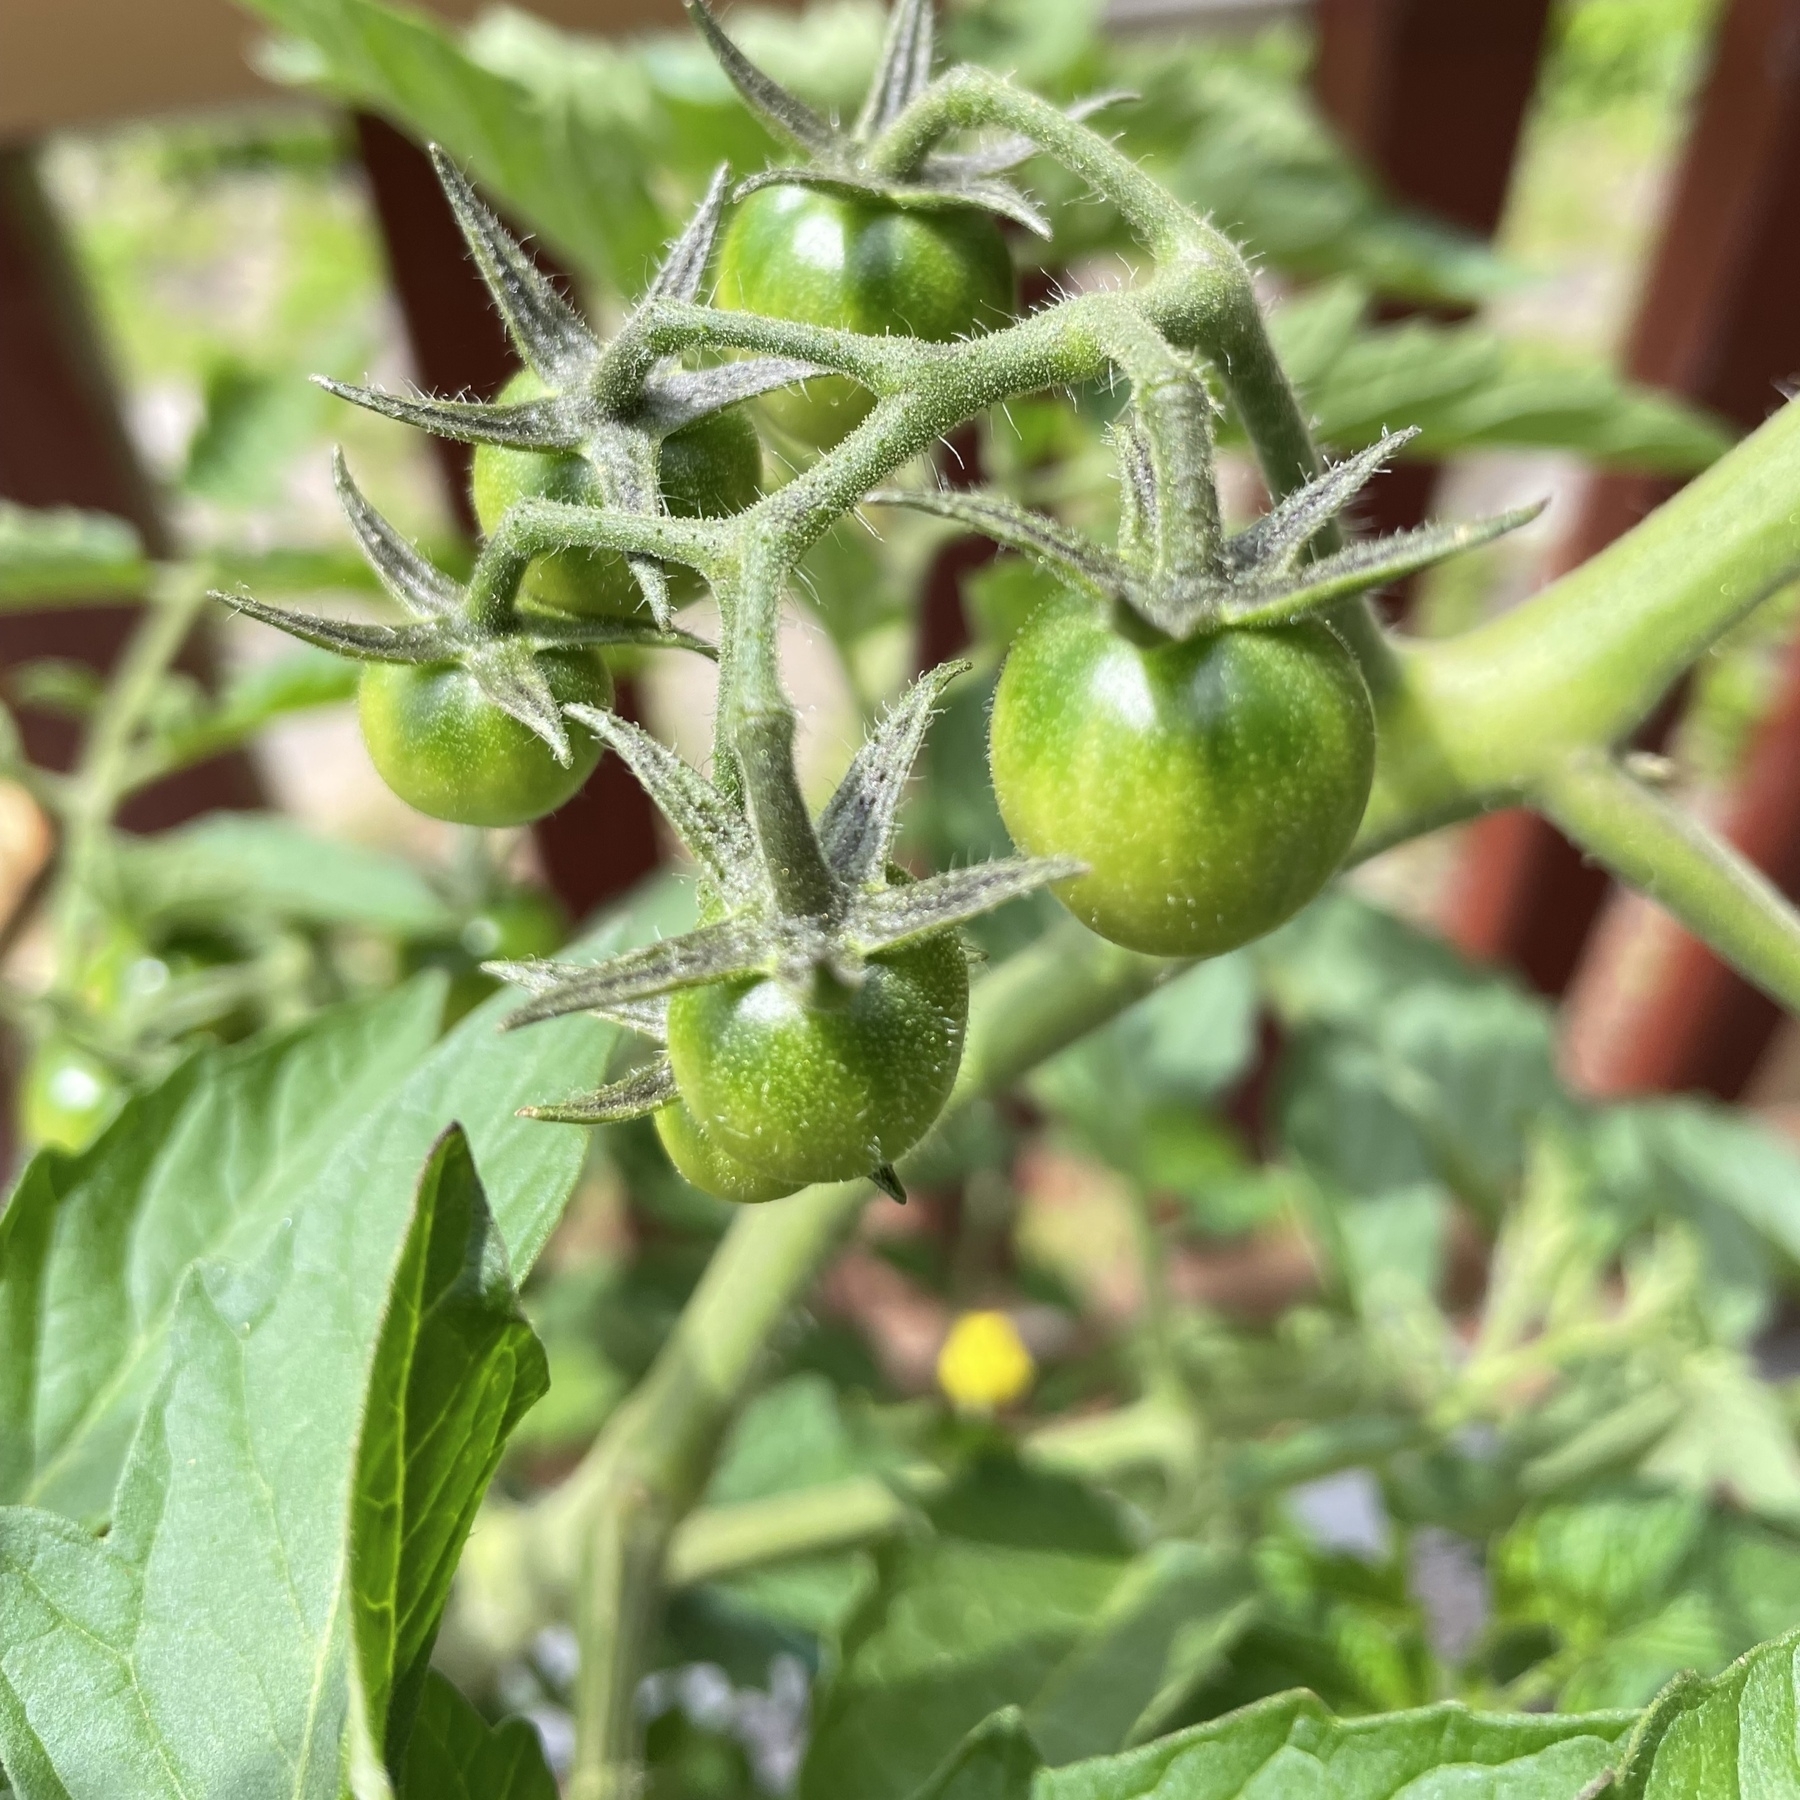 Small tomatoes on the vine.